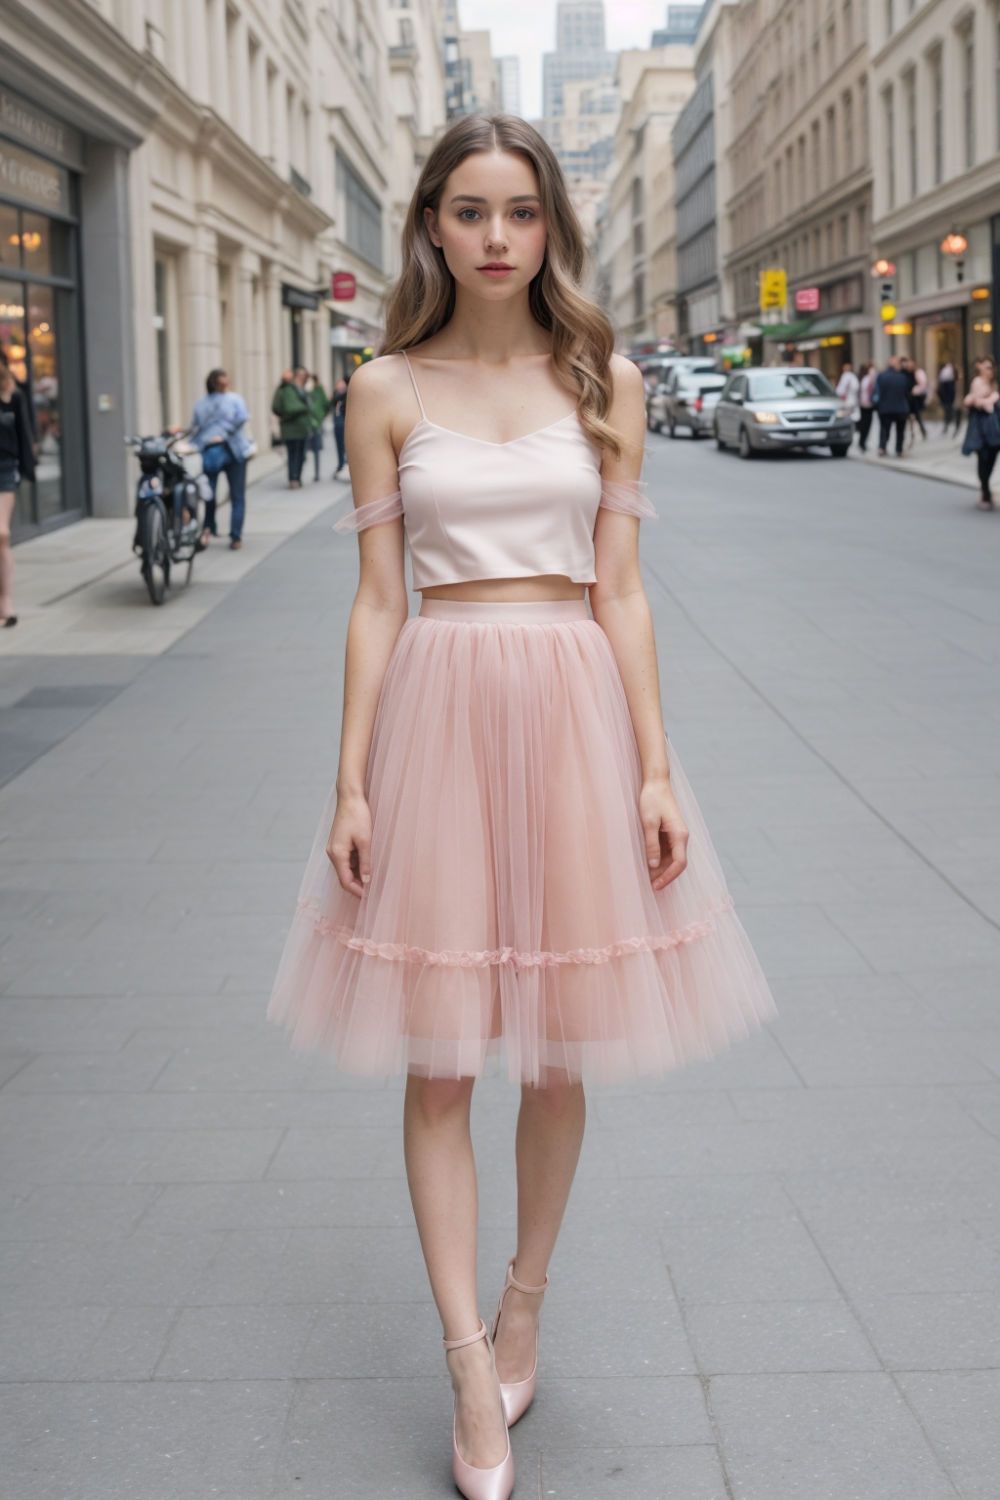 soft pink tulle skirt for dreamy look